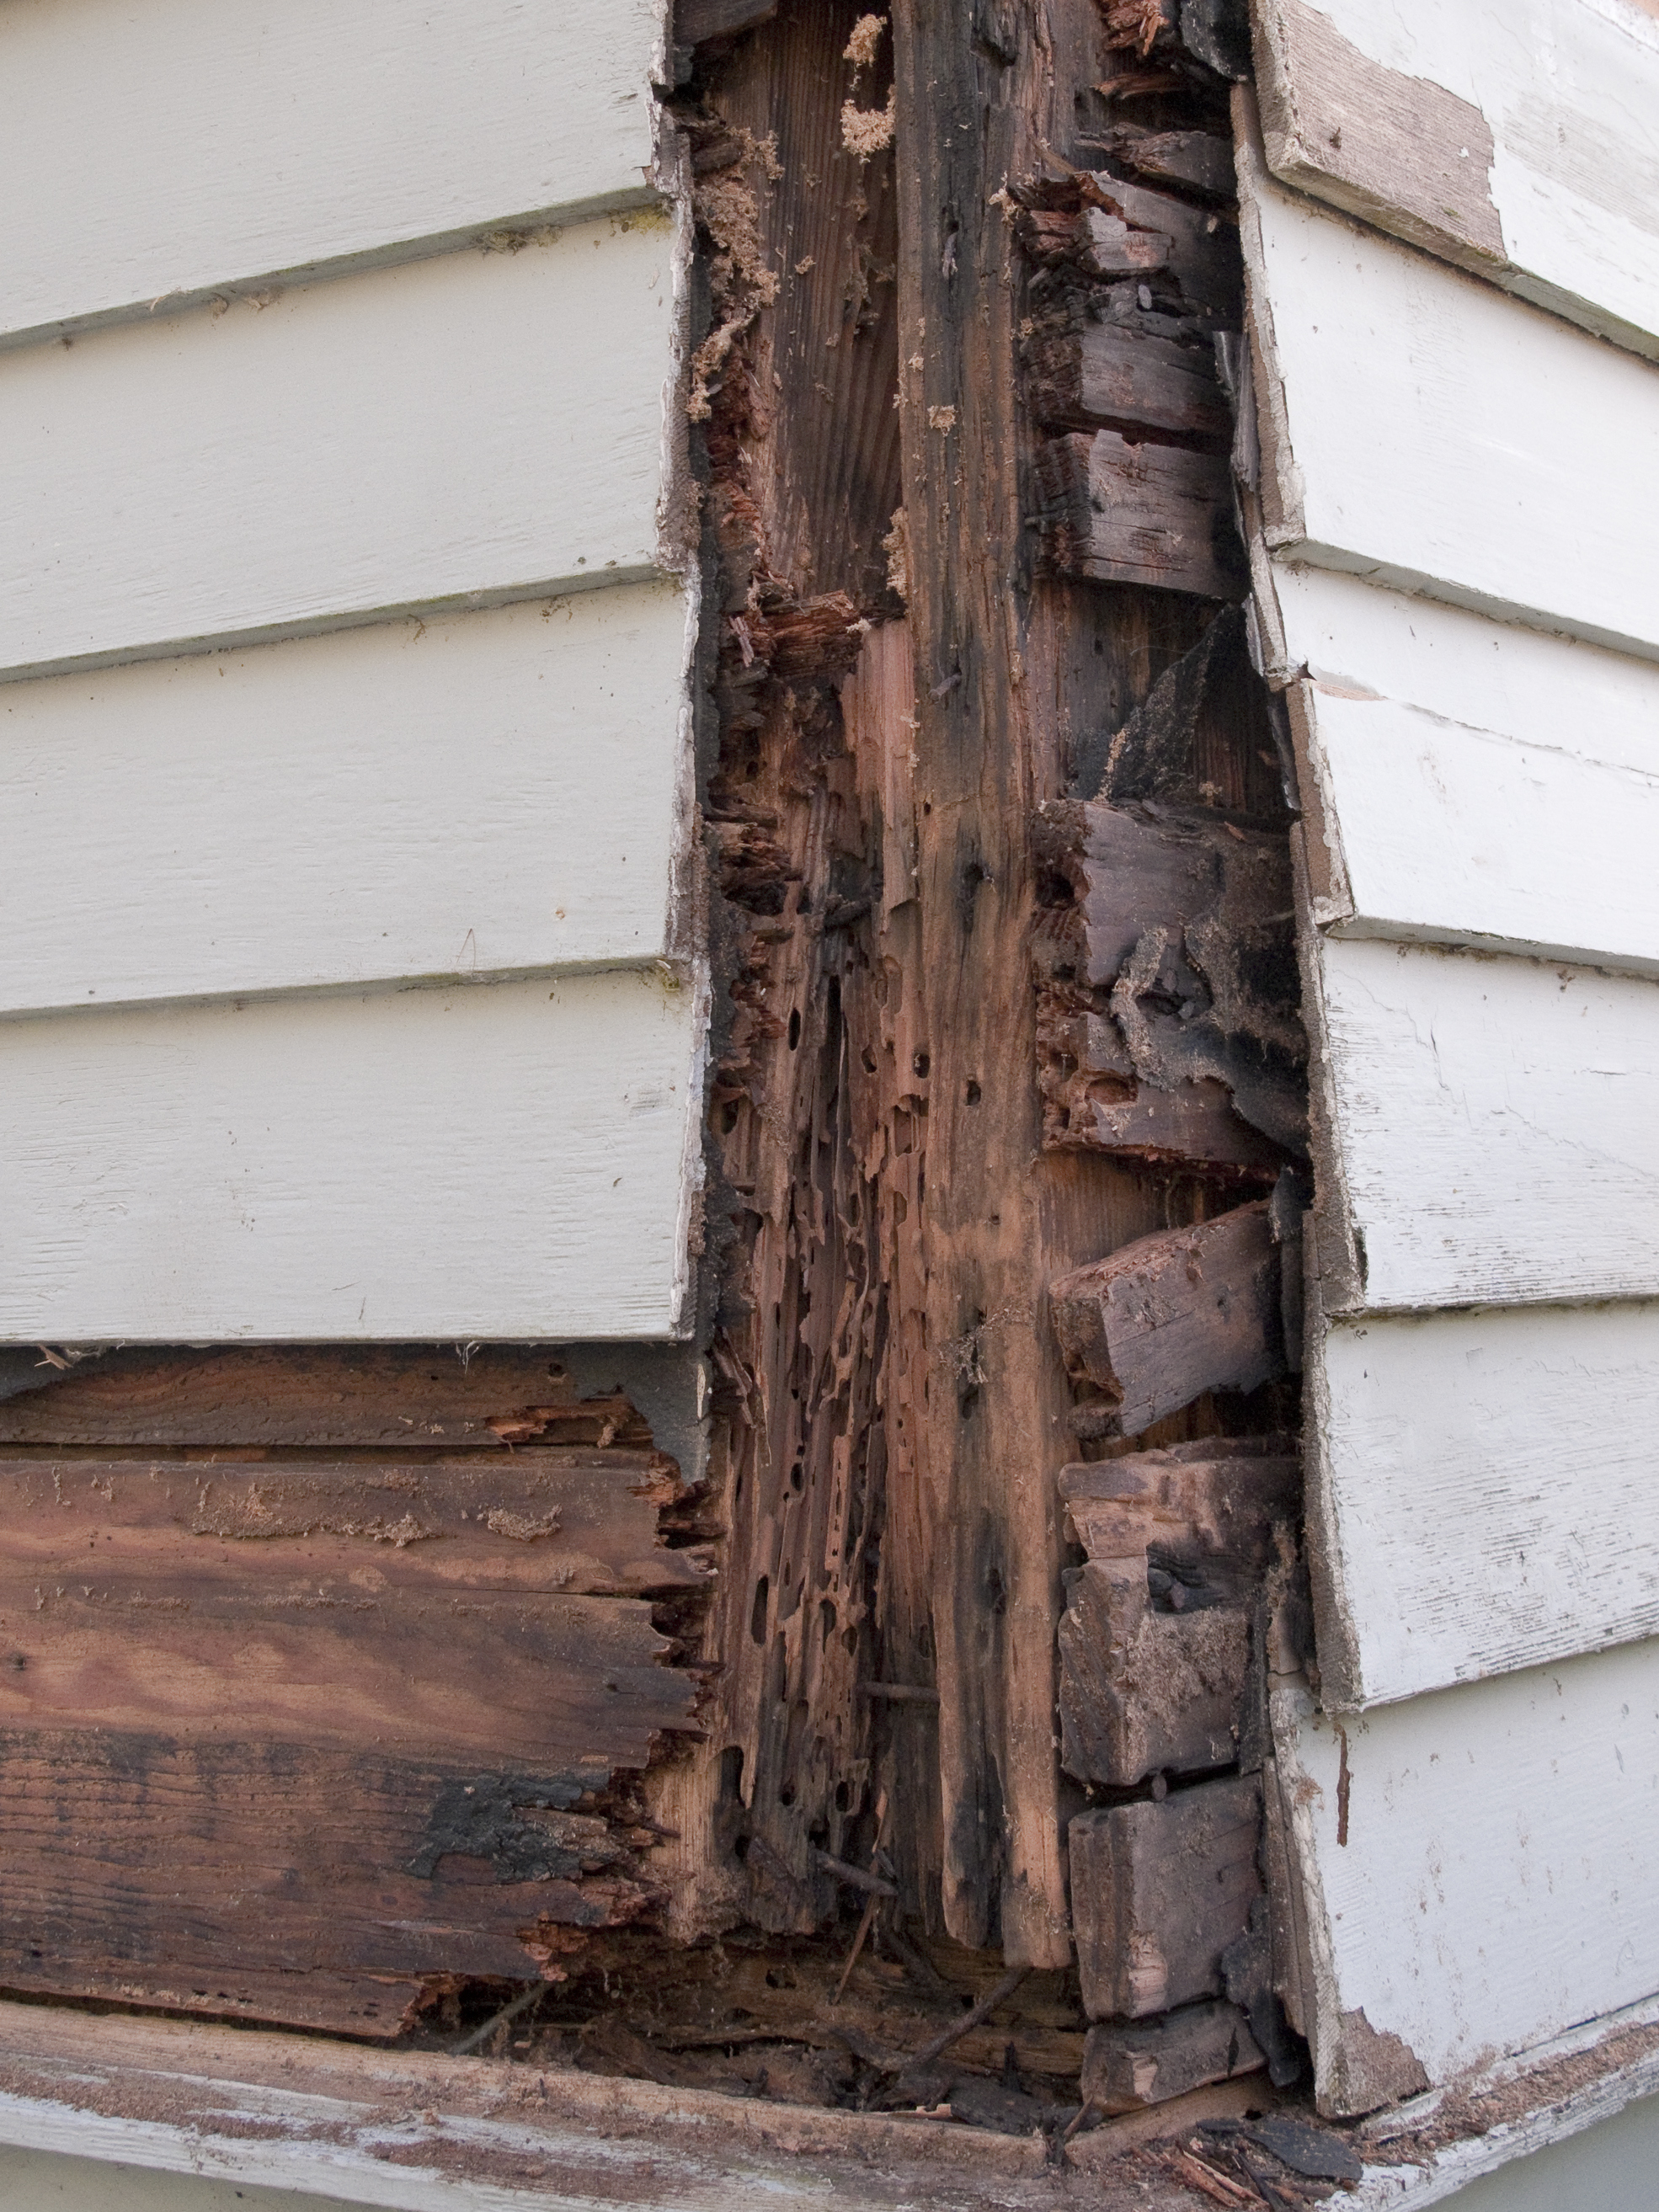 Damaged house siding and frame with visible termite infestation